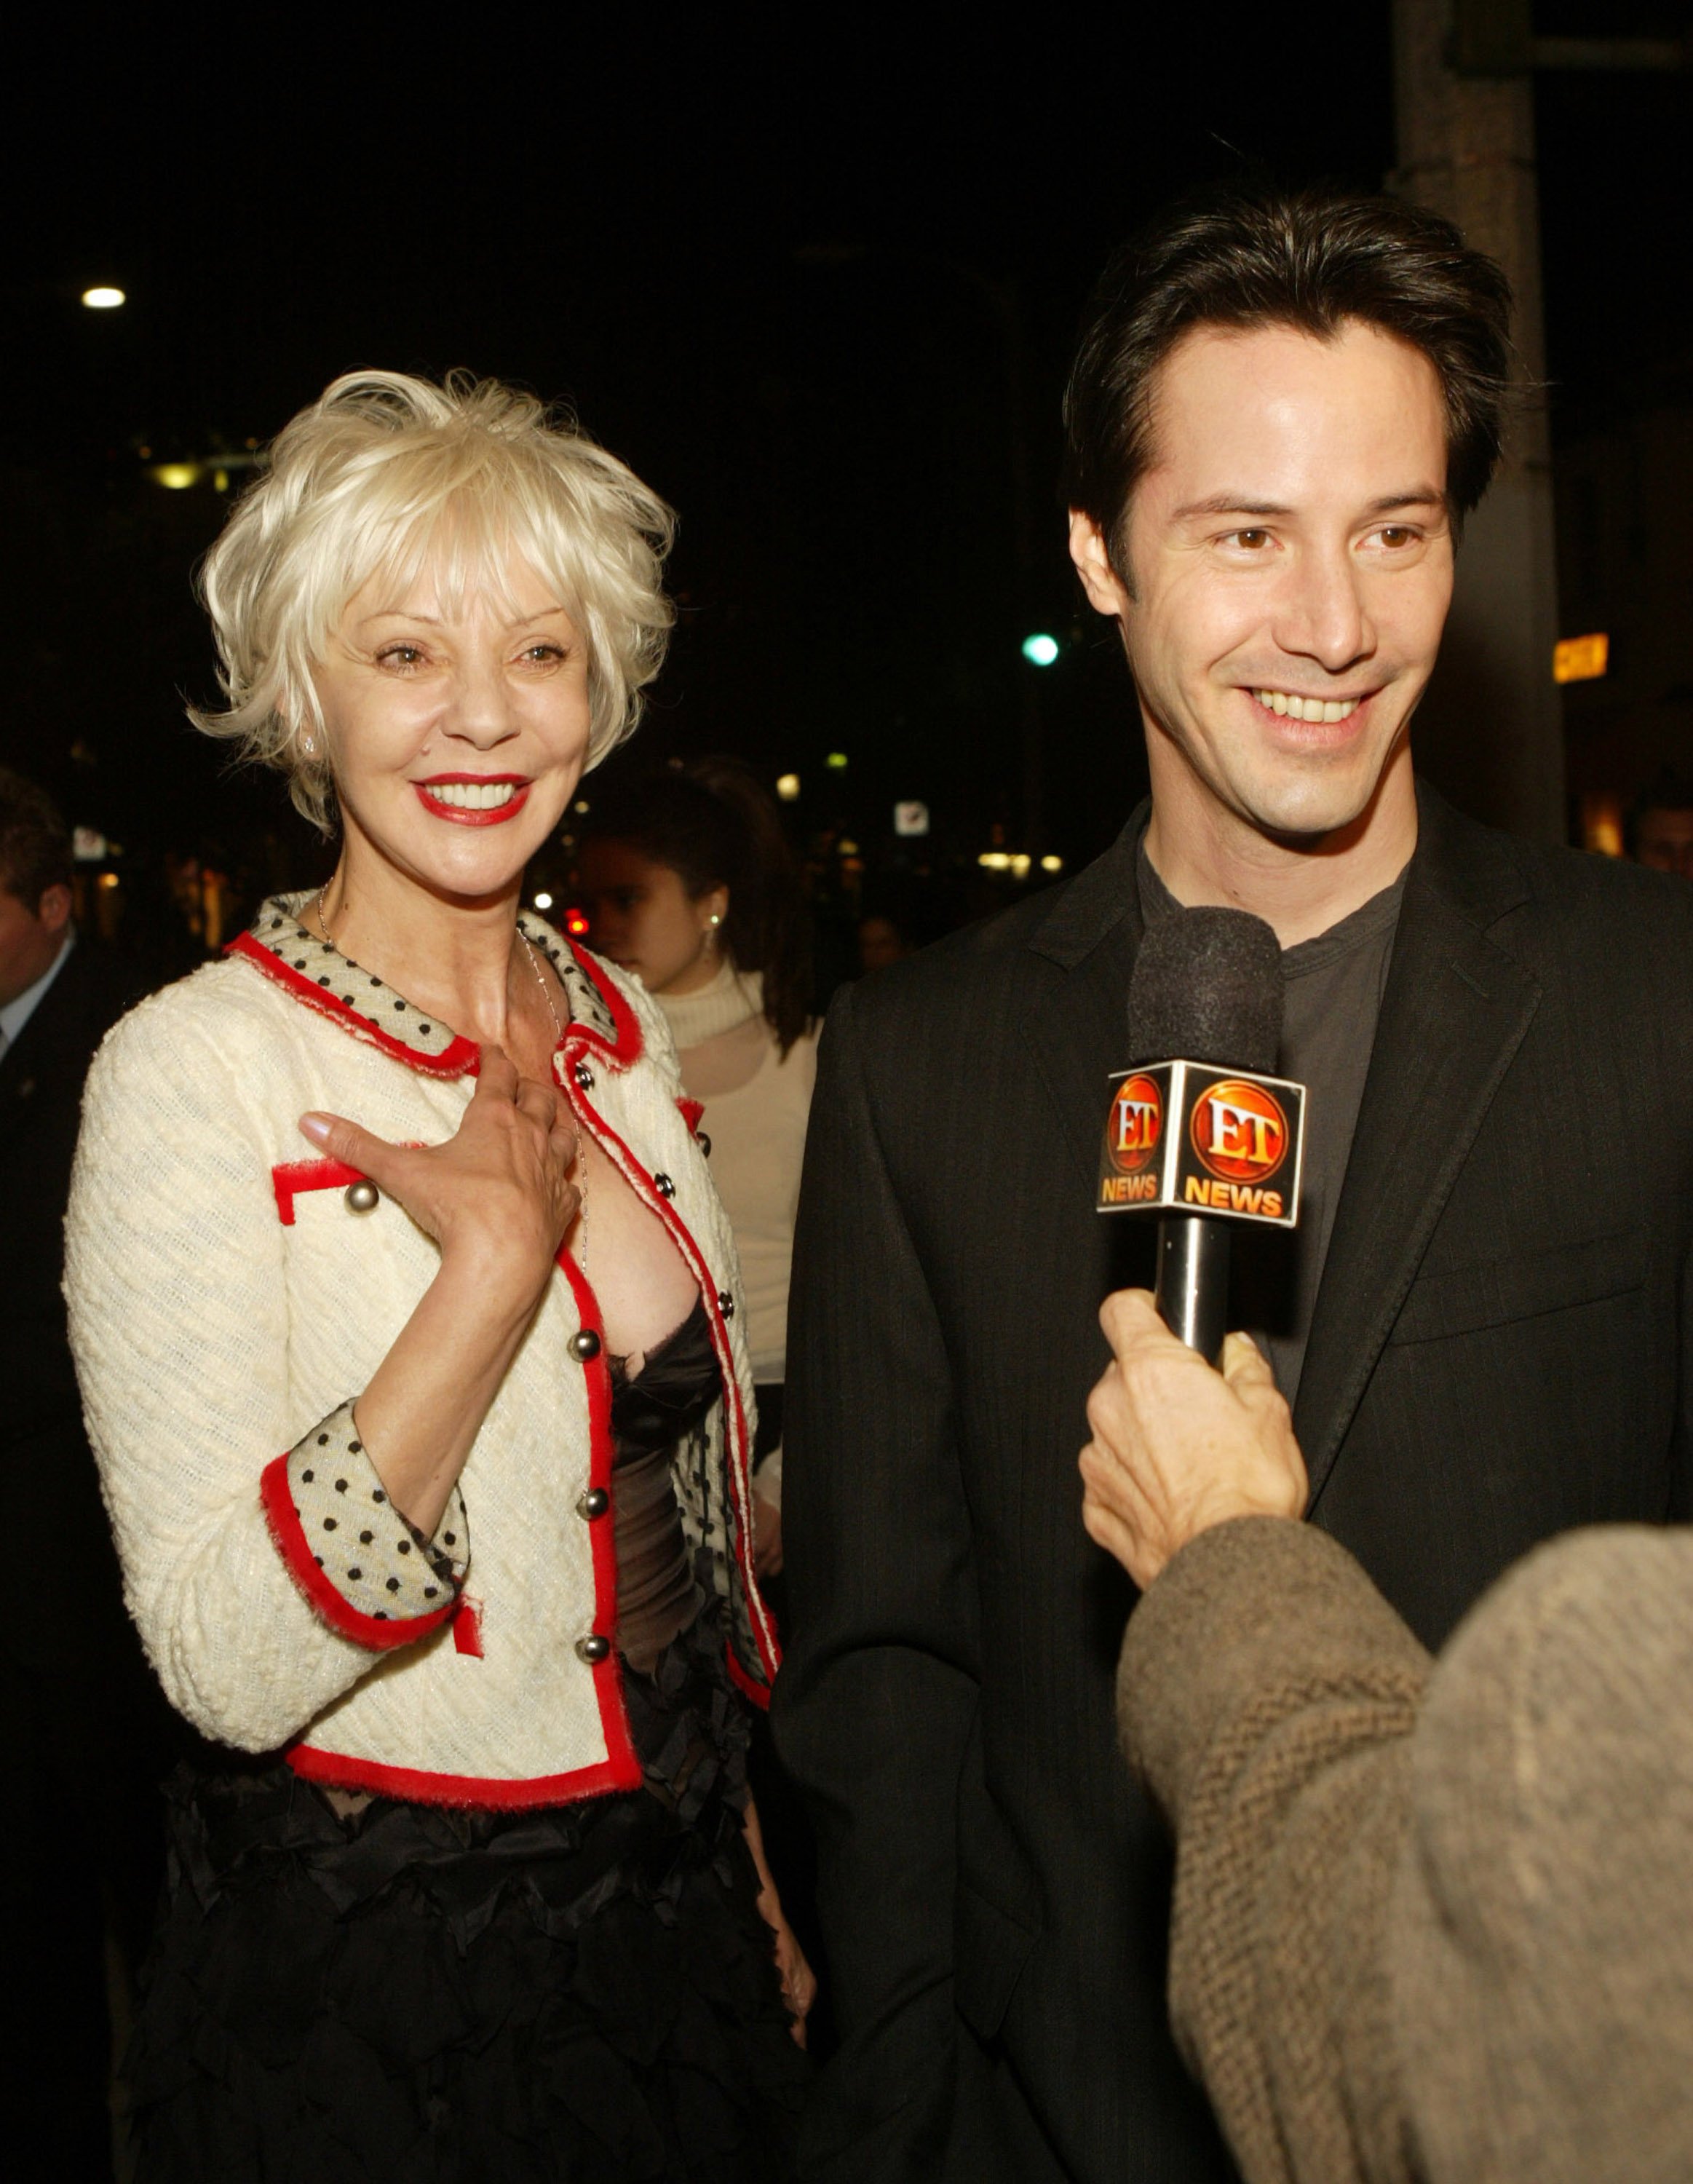 Patricia Taylor and Keanu Reeves at the Mann Village Westwood for the "Something's Gotta Give" Los Angeles Premiere in Westwood, California, on December 8, 2003. | Source: Getty Images